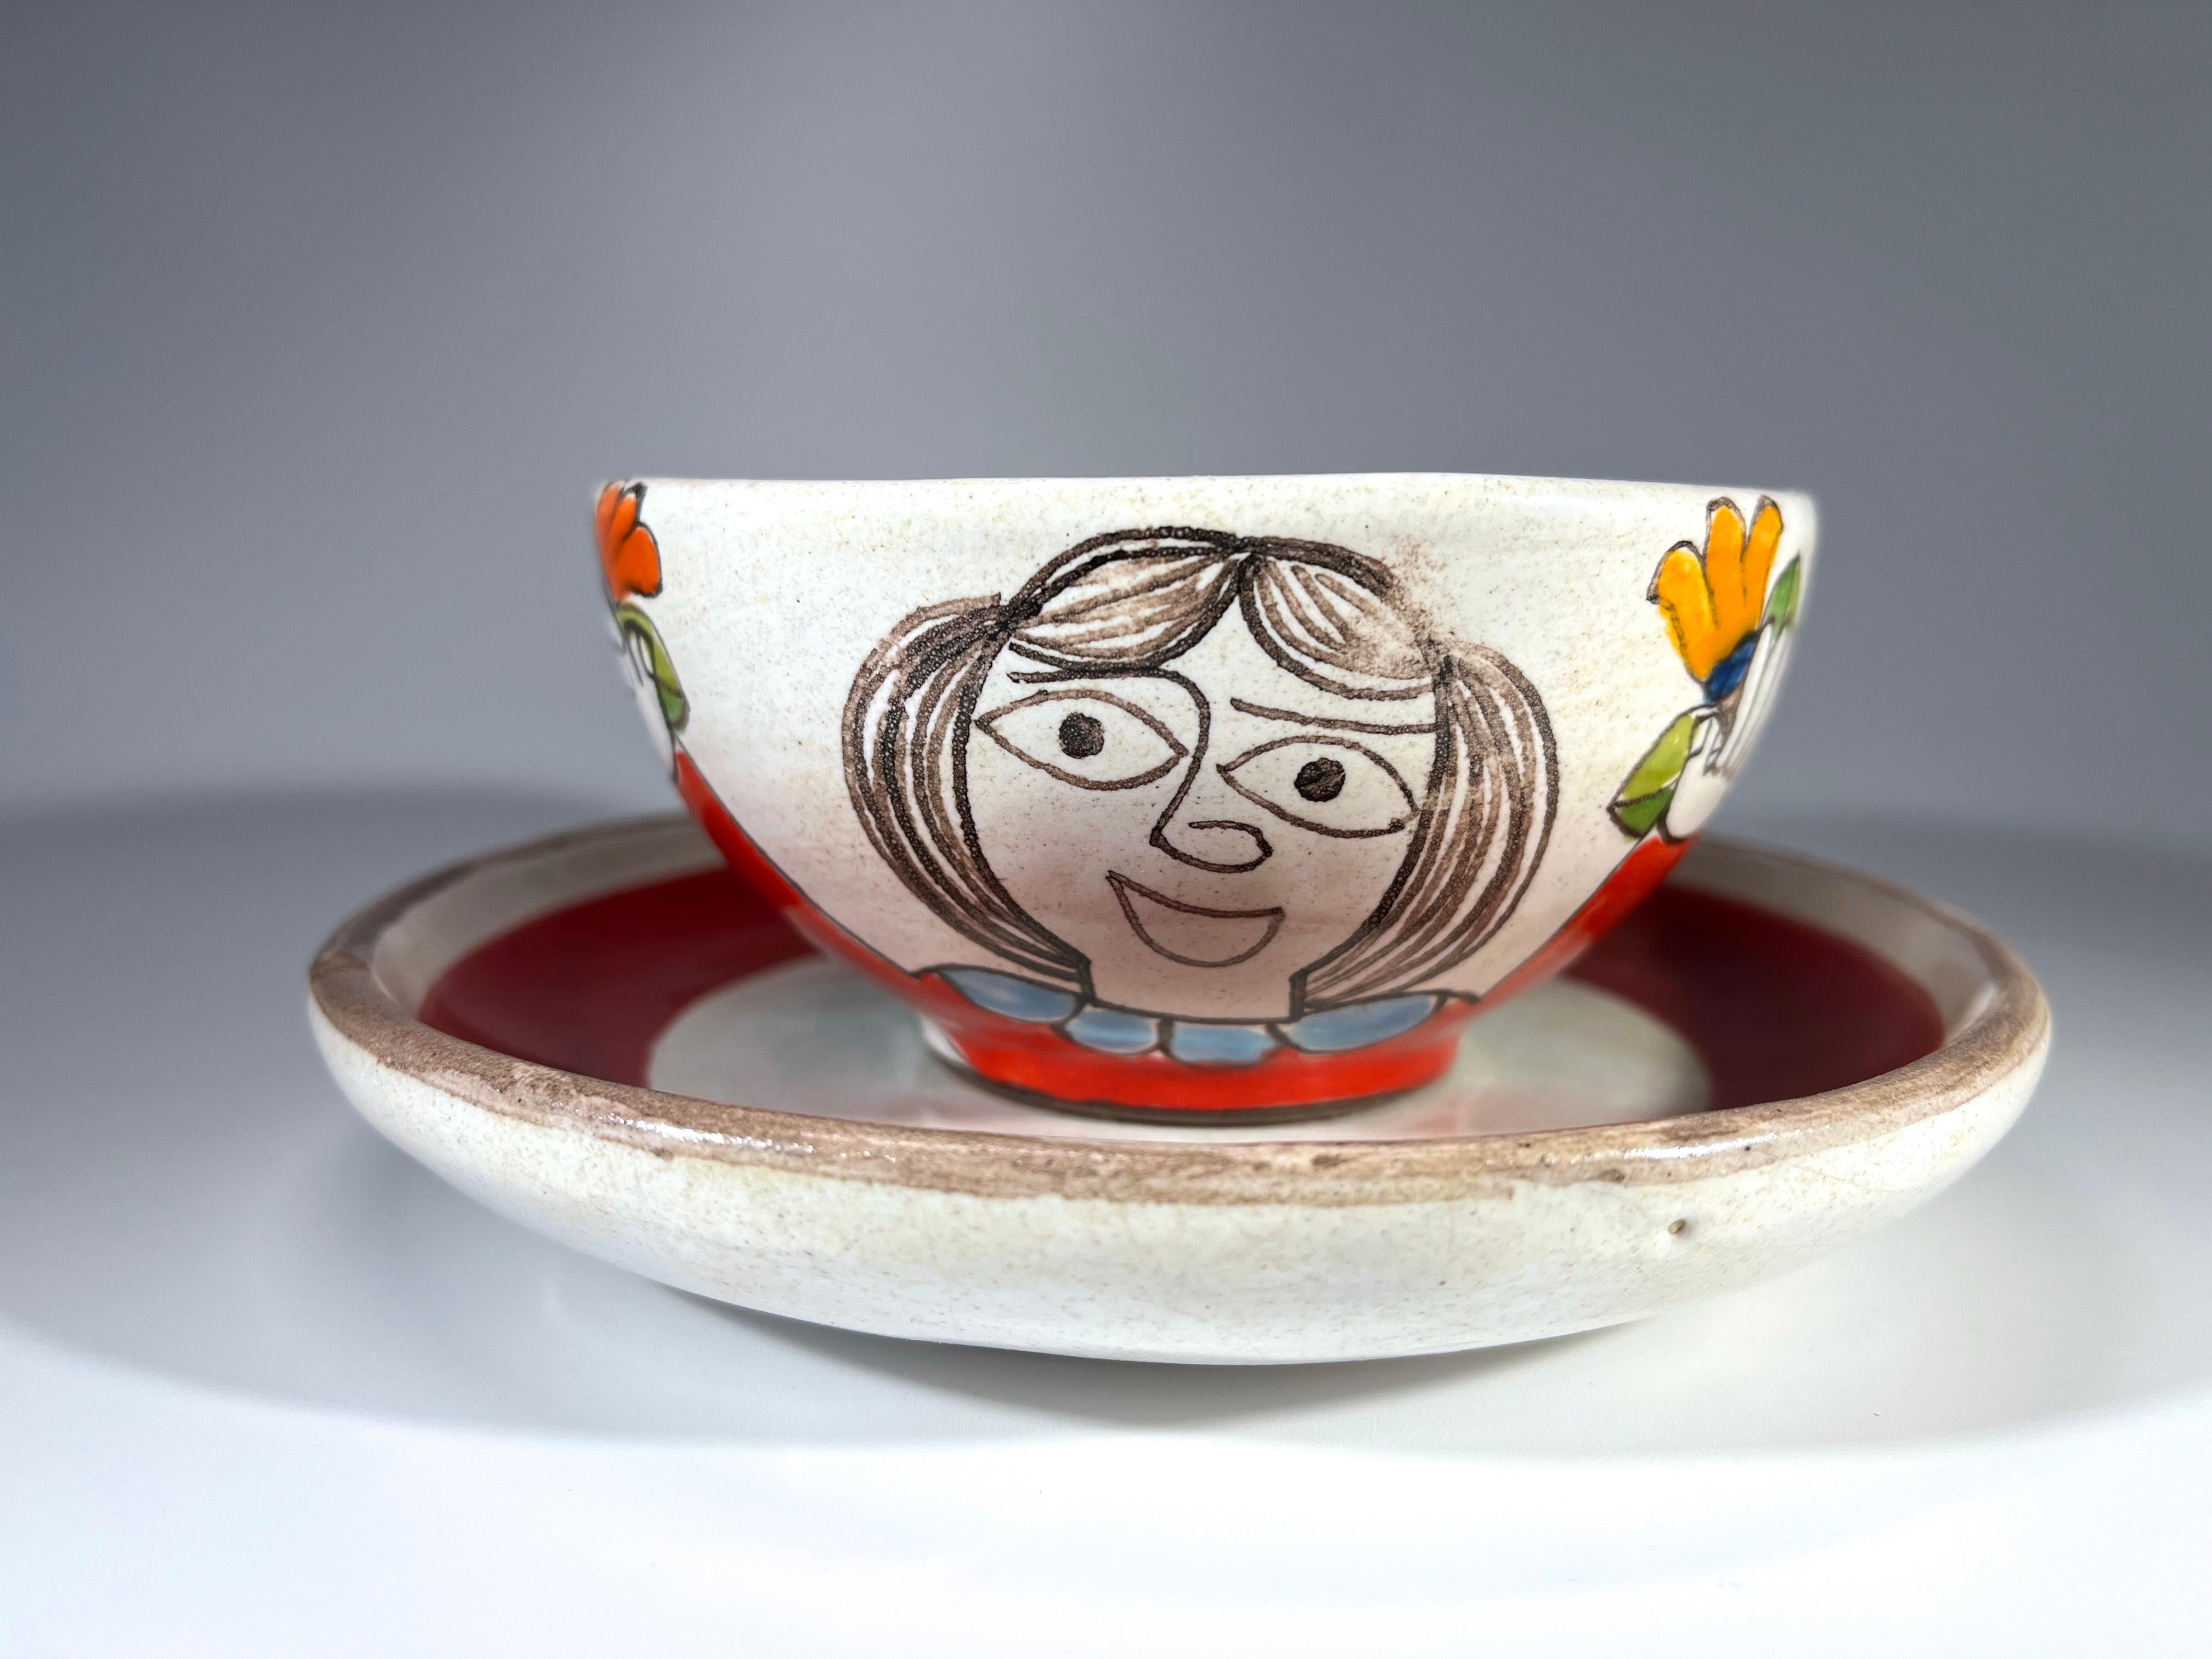 DeSimone of Italy, ceramic cup and saucer, hand decorated with girl holding flowers
A fun piece of Italian dash
Circa 1960's
Signed DeSimone, Italy
Cup: Height 2 inch, Diameter 4.25 inch
Saucer: Height 1 inch, Diameter 6 inch
In good condition
Wear